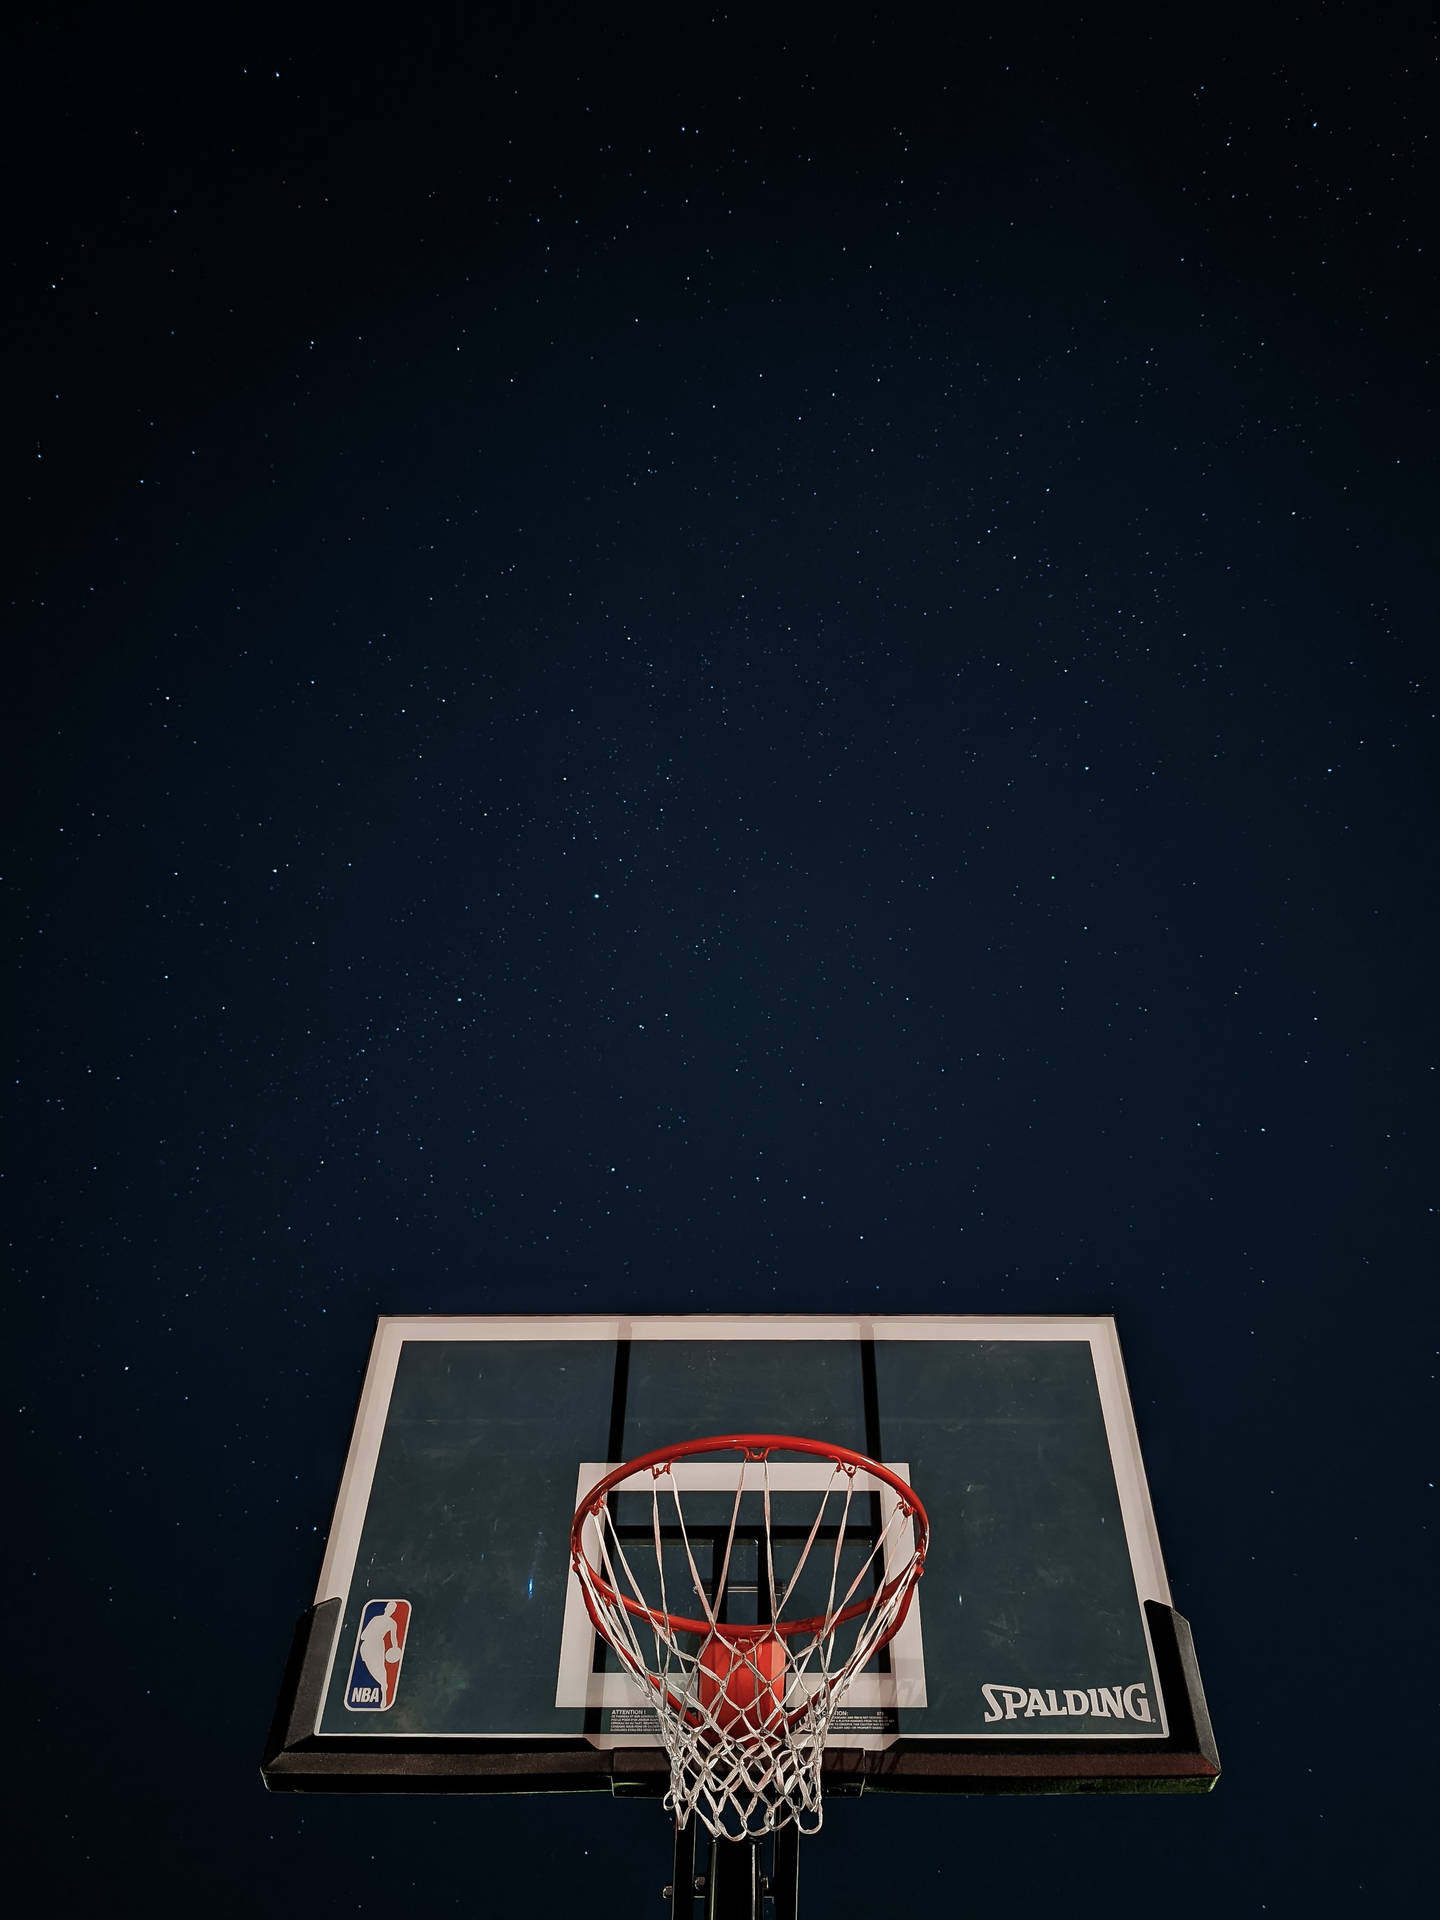 Coolest Iphone Basketball Ring Background